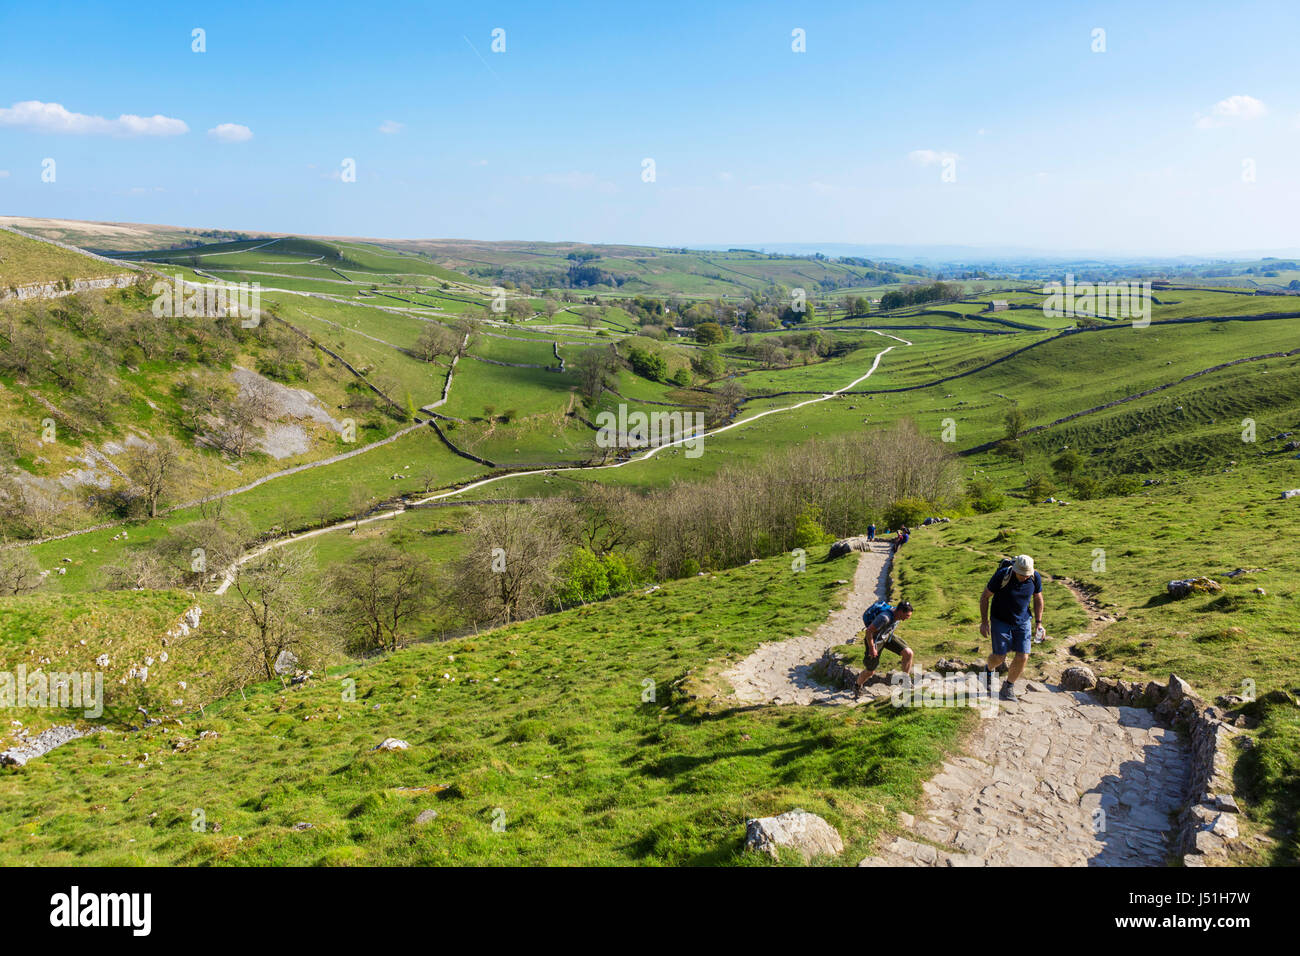 Walkers on the climb up to the top of Malham Cove, Malham, Malhamdale, Yorkshire Dales National Park, North Yorkshire, England, UK. Stock Photo